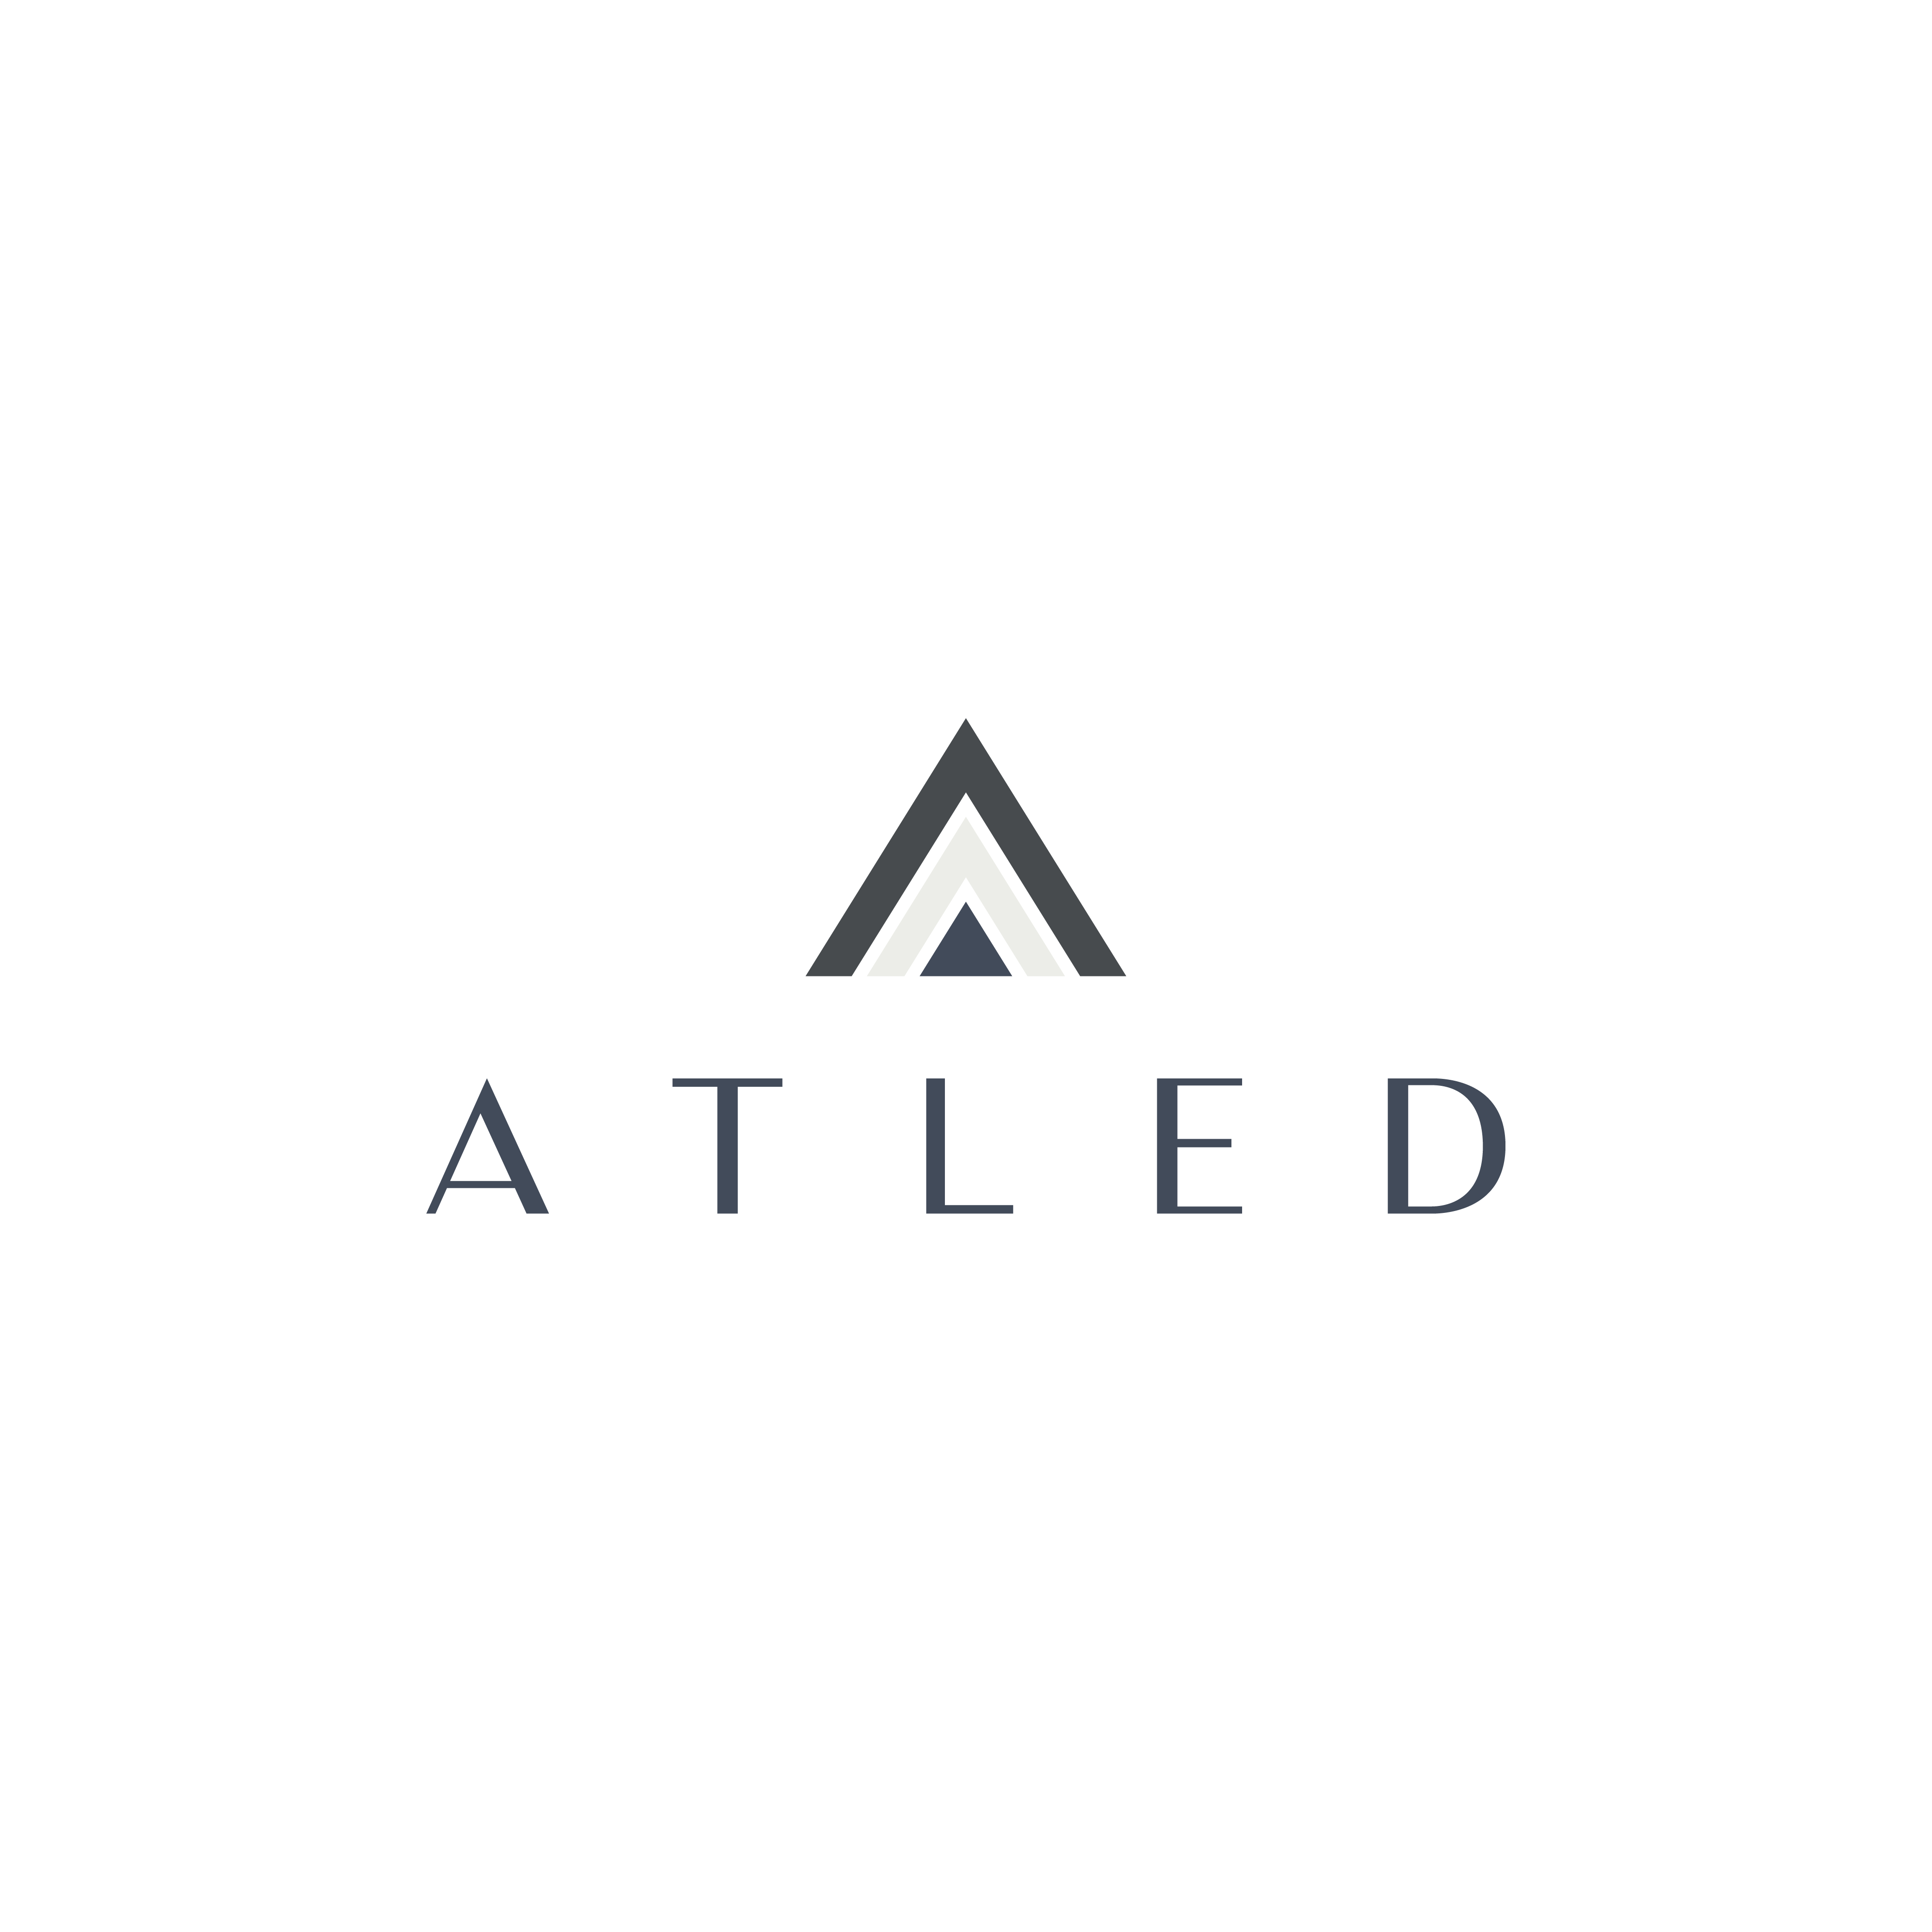 Atled Consulting Ltd.